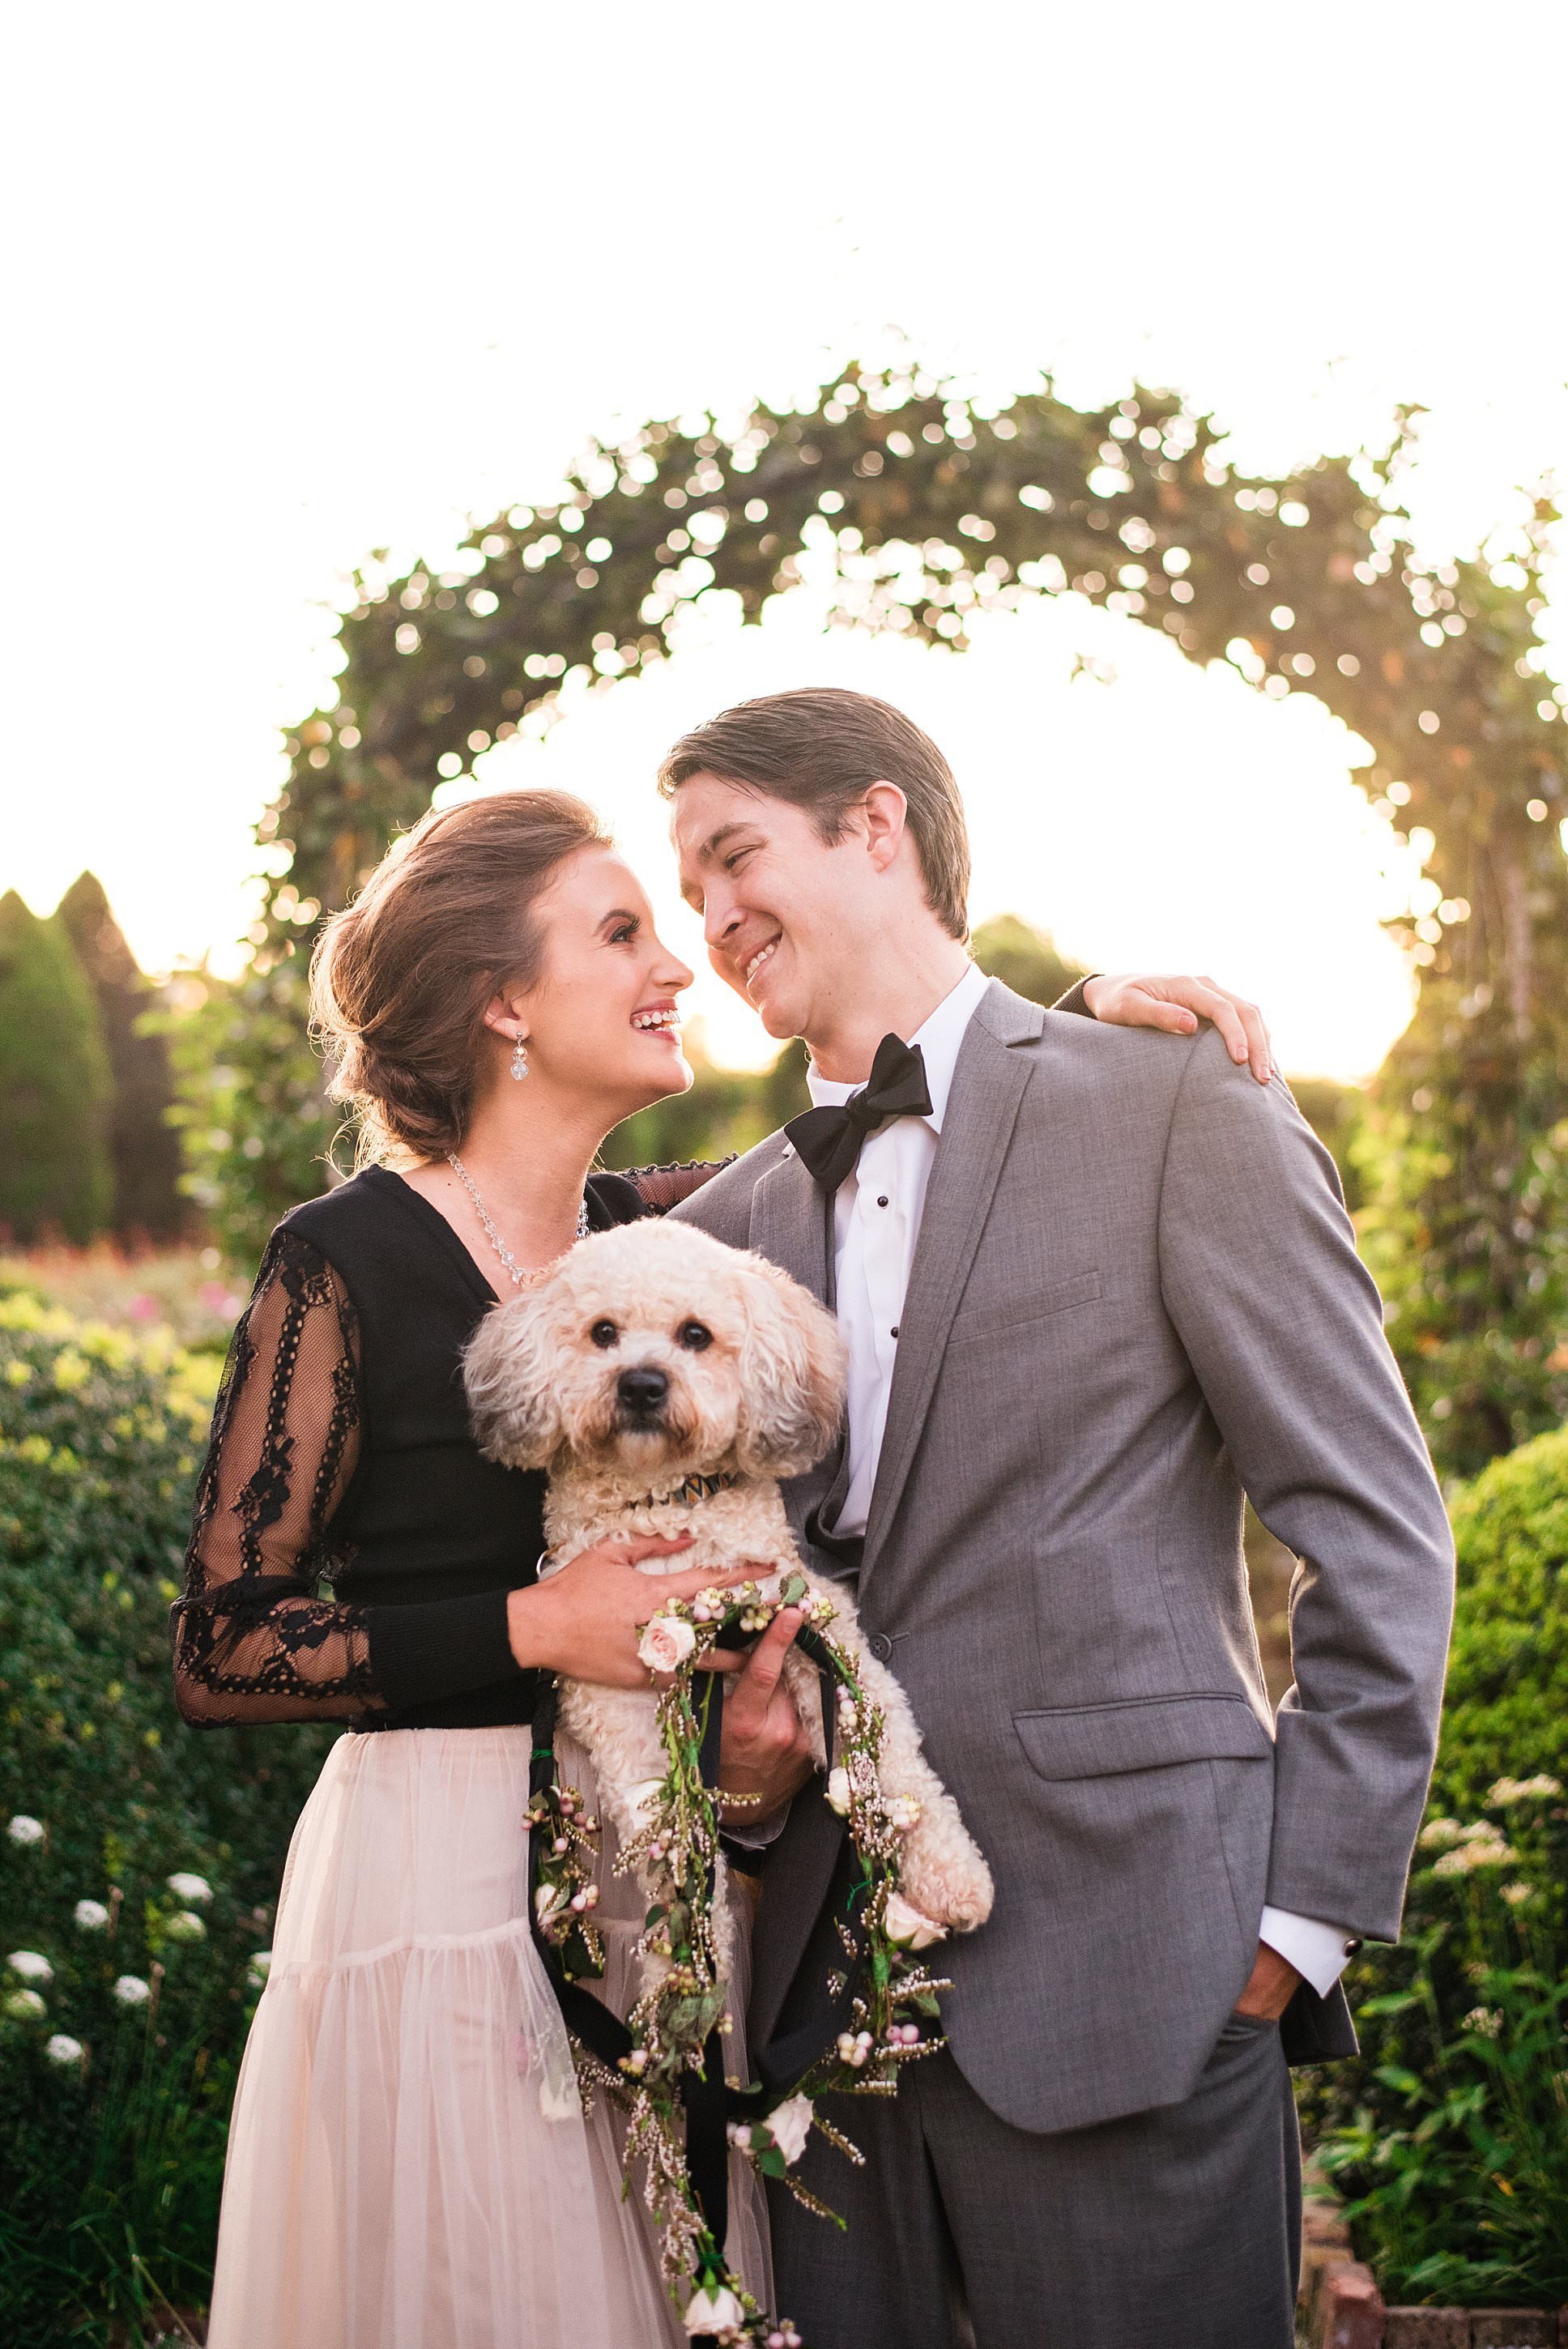 Styled photoshoot of couple standing in the gardens at Carnton Plantation holding their dog who has a flower leash